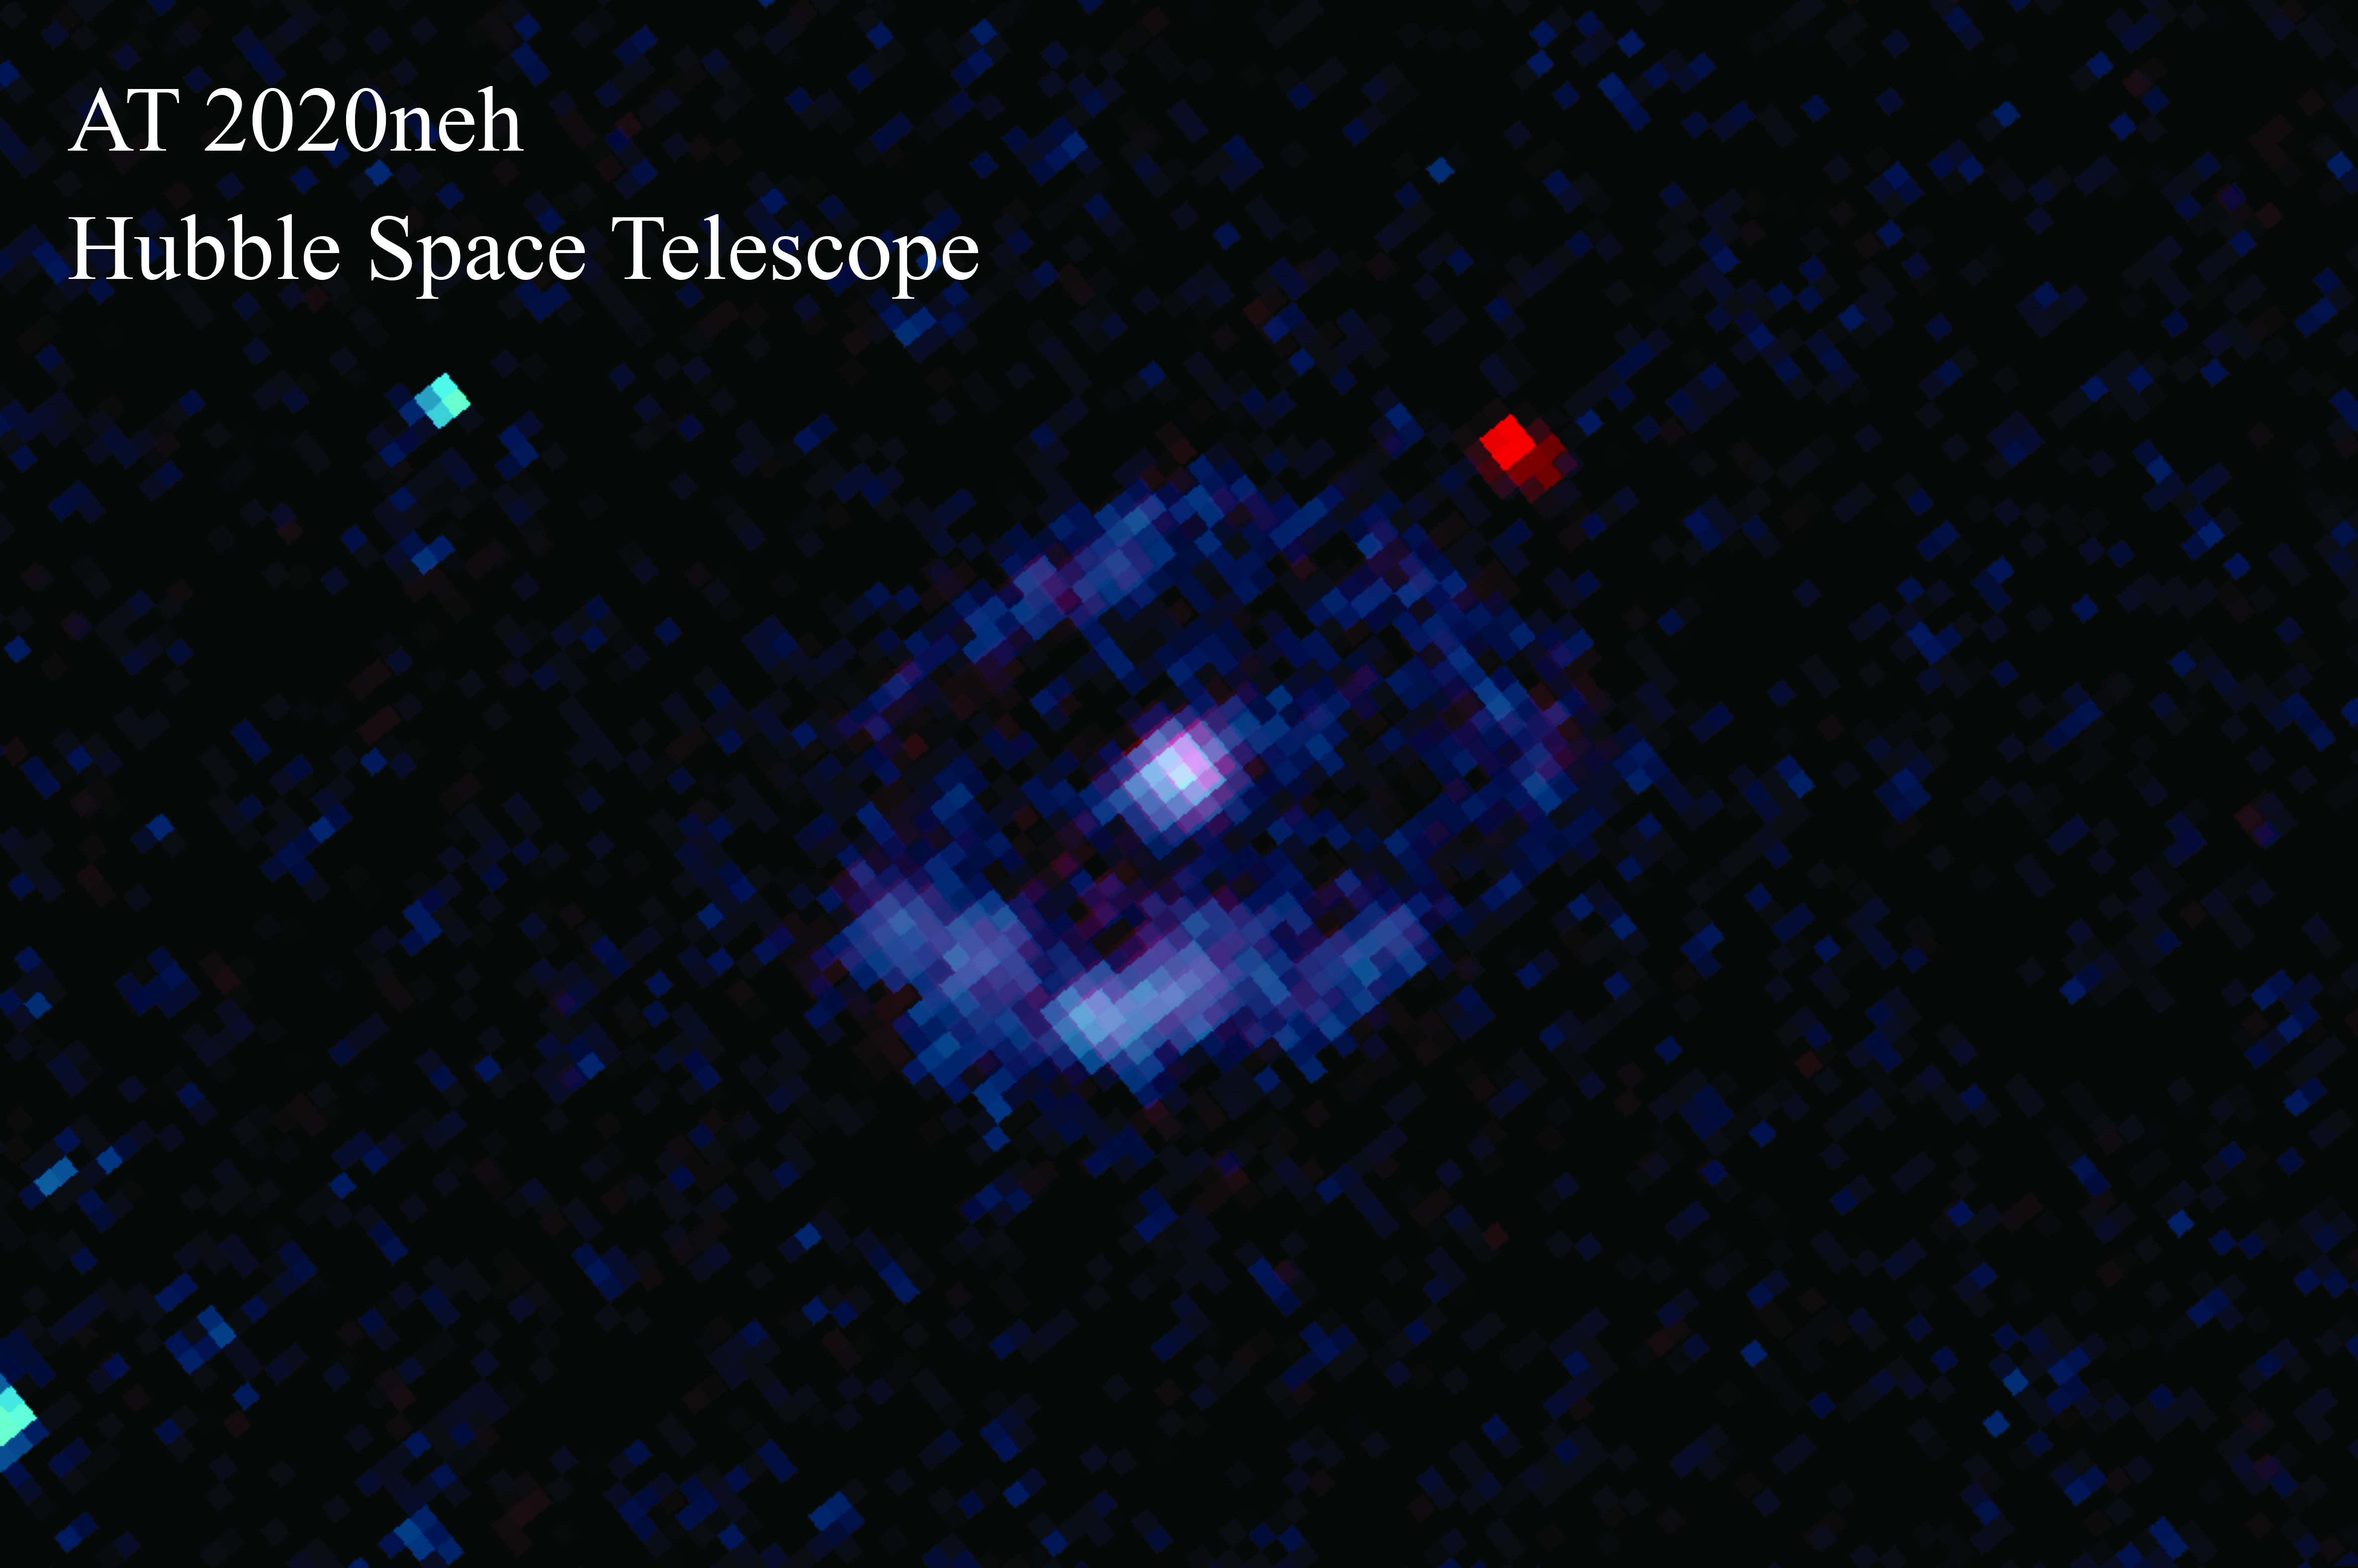 Astronomers have discovered a star being ripped apart by a black hole from the galaxy SDSS J152120.07+140410.5, 850 million light-years away.  Researchers pointed to NASA's Hubble Space Telescope to study the effects, called AT 2020neh, shown in the center of the image.  Hubble's ultraviolet camera has seen a ring of stars forming around the core of the galaxy where AT 2020neh is located.